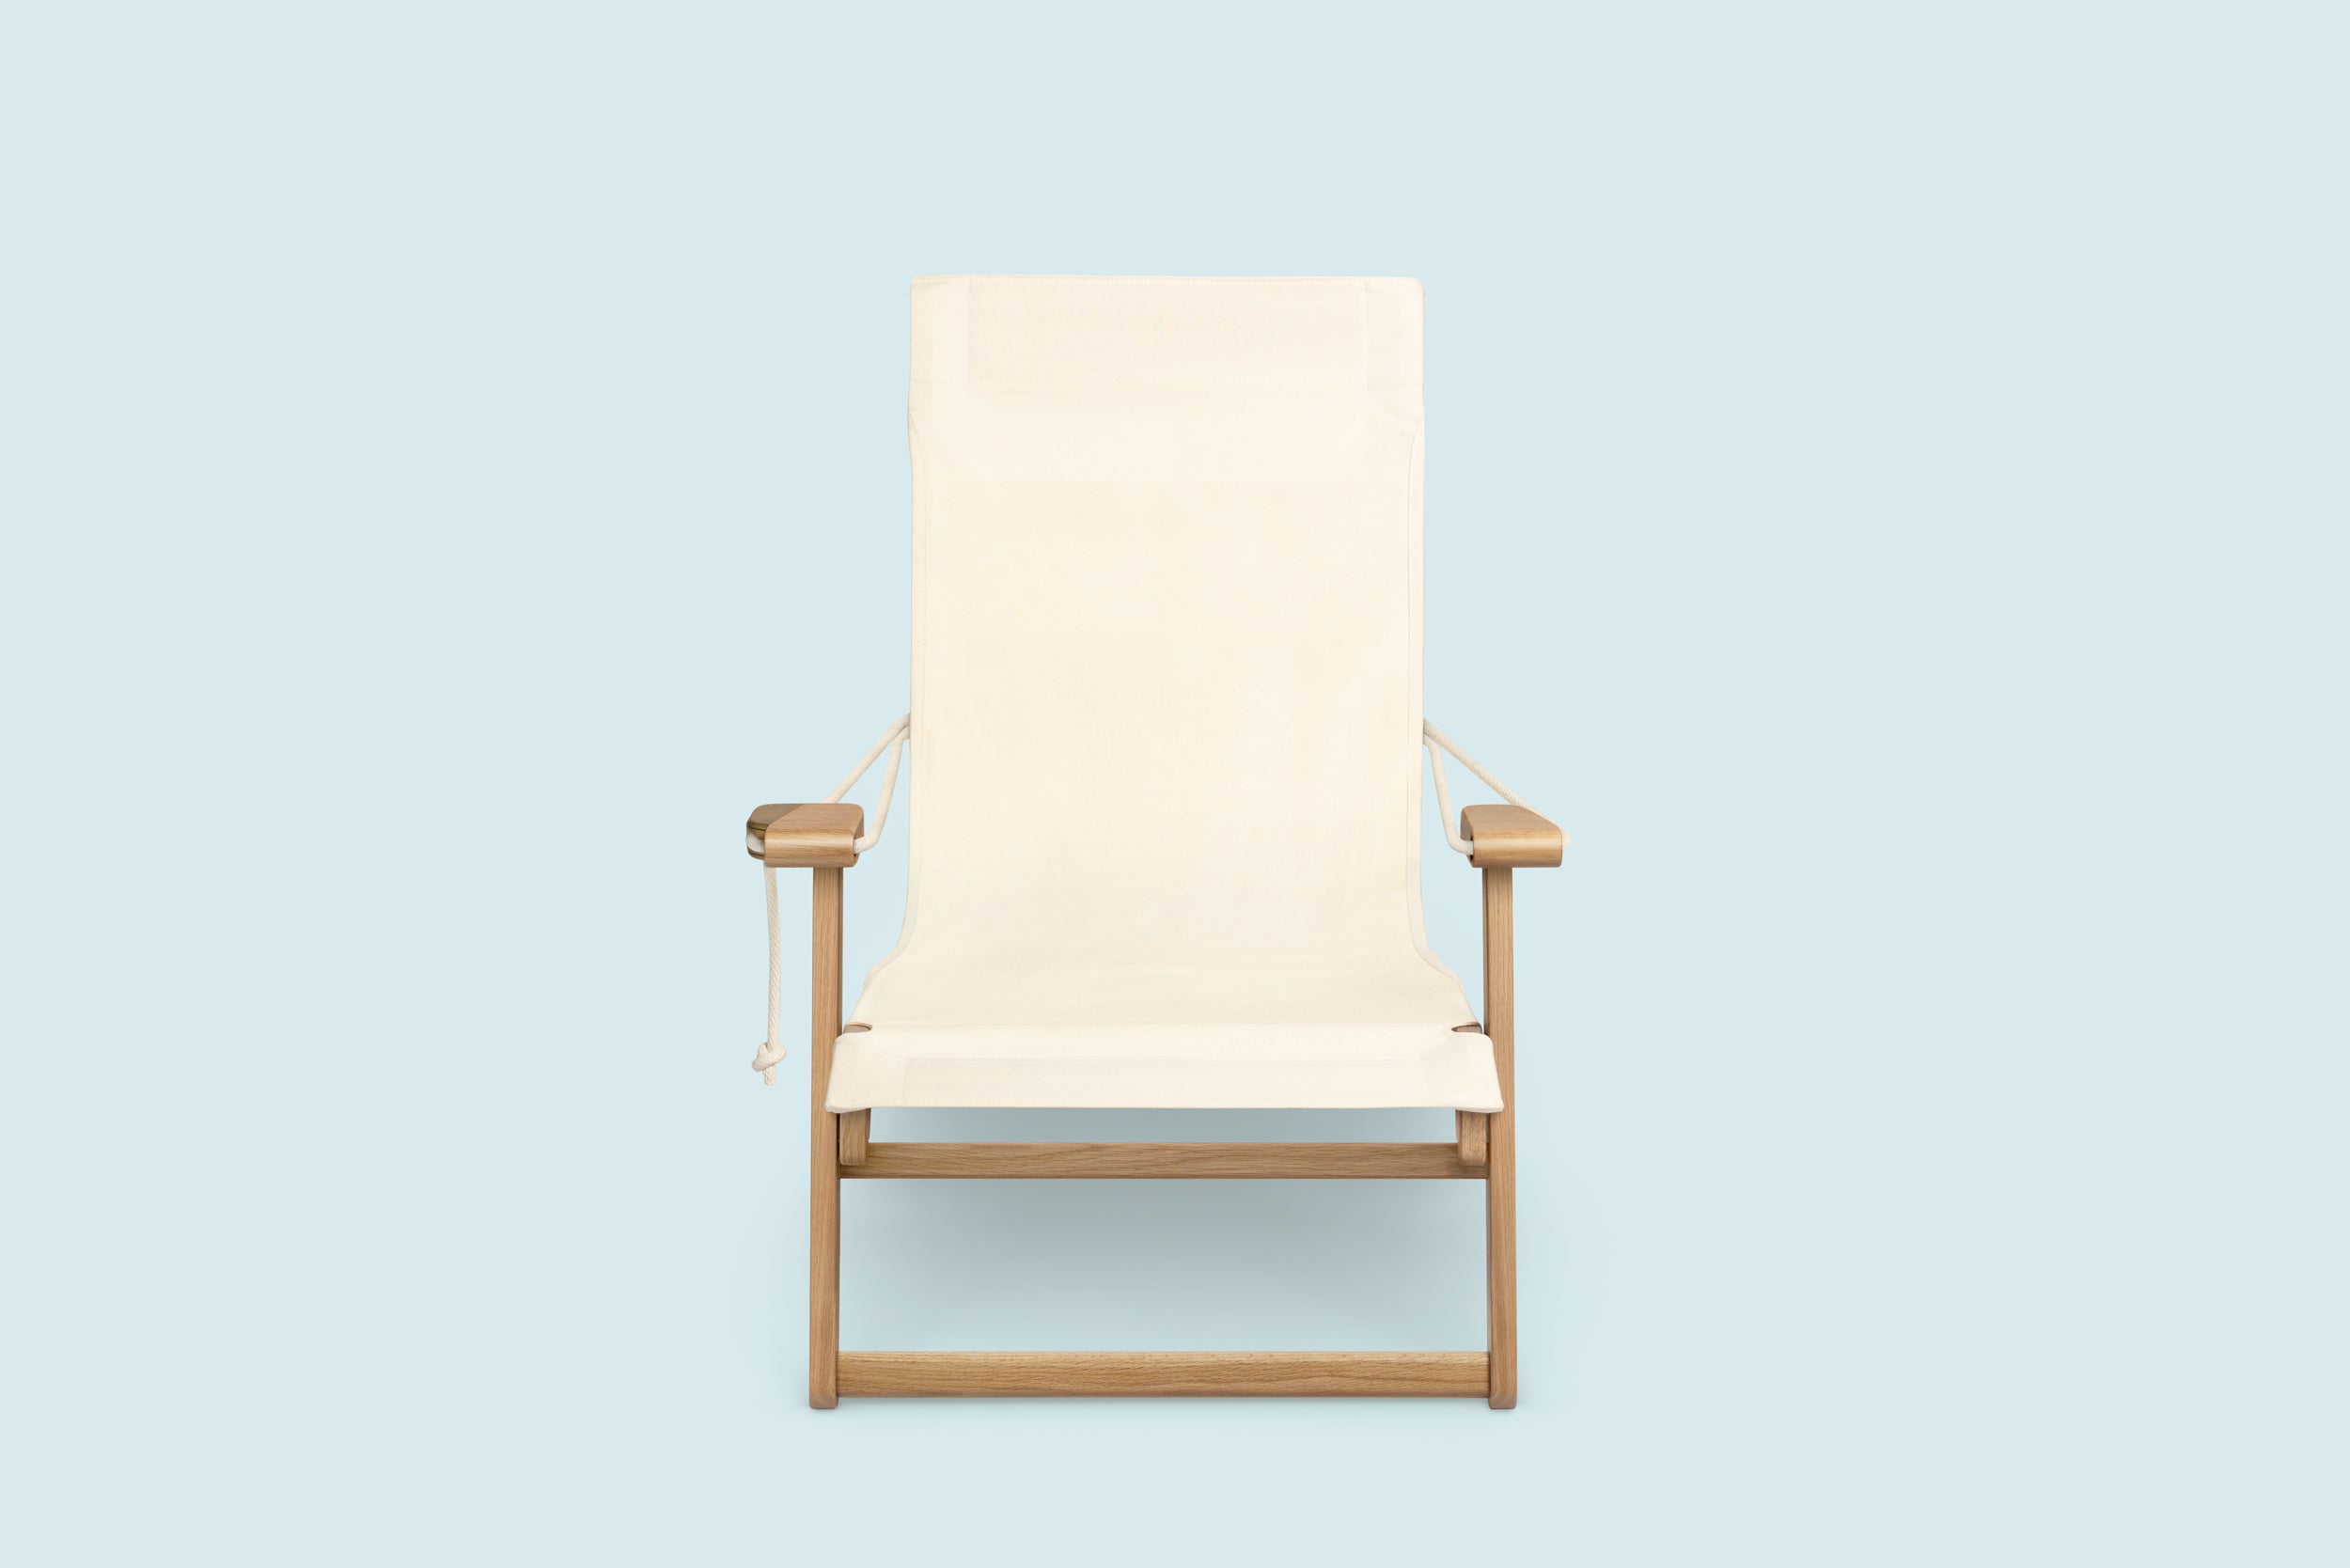 Front-facing image of the Shorebird Beach Chair on a light blue background